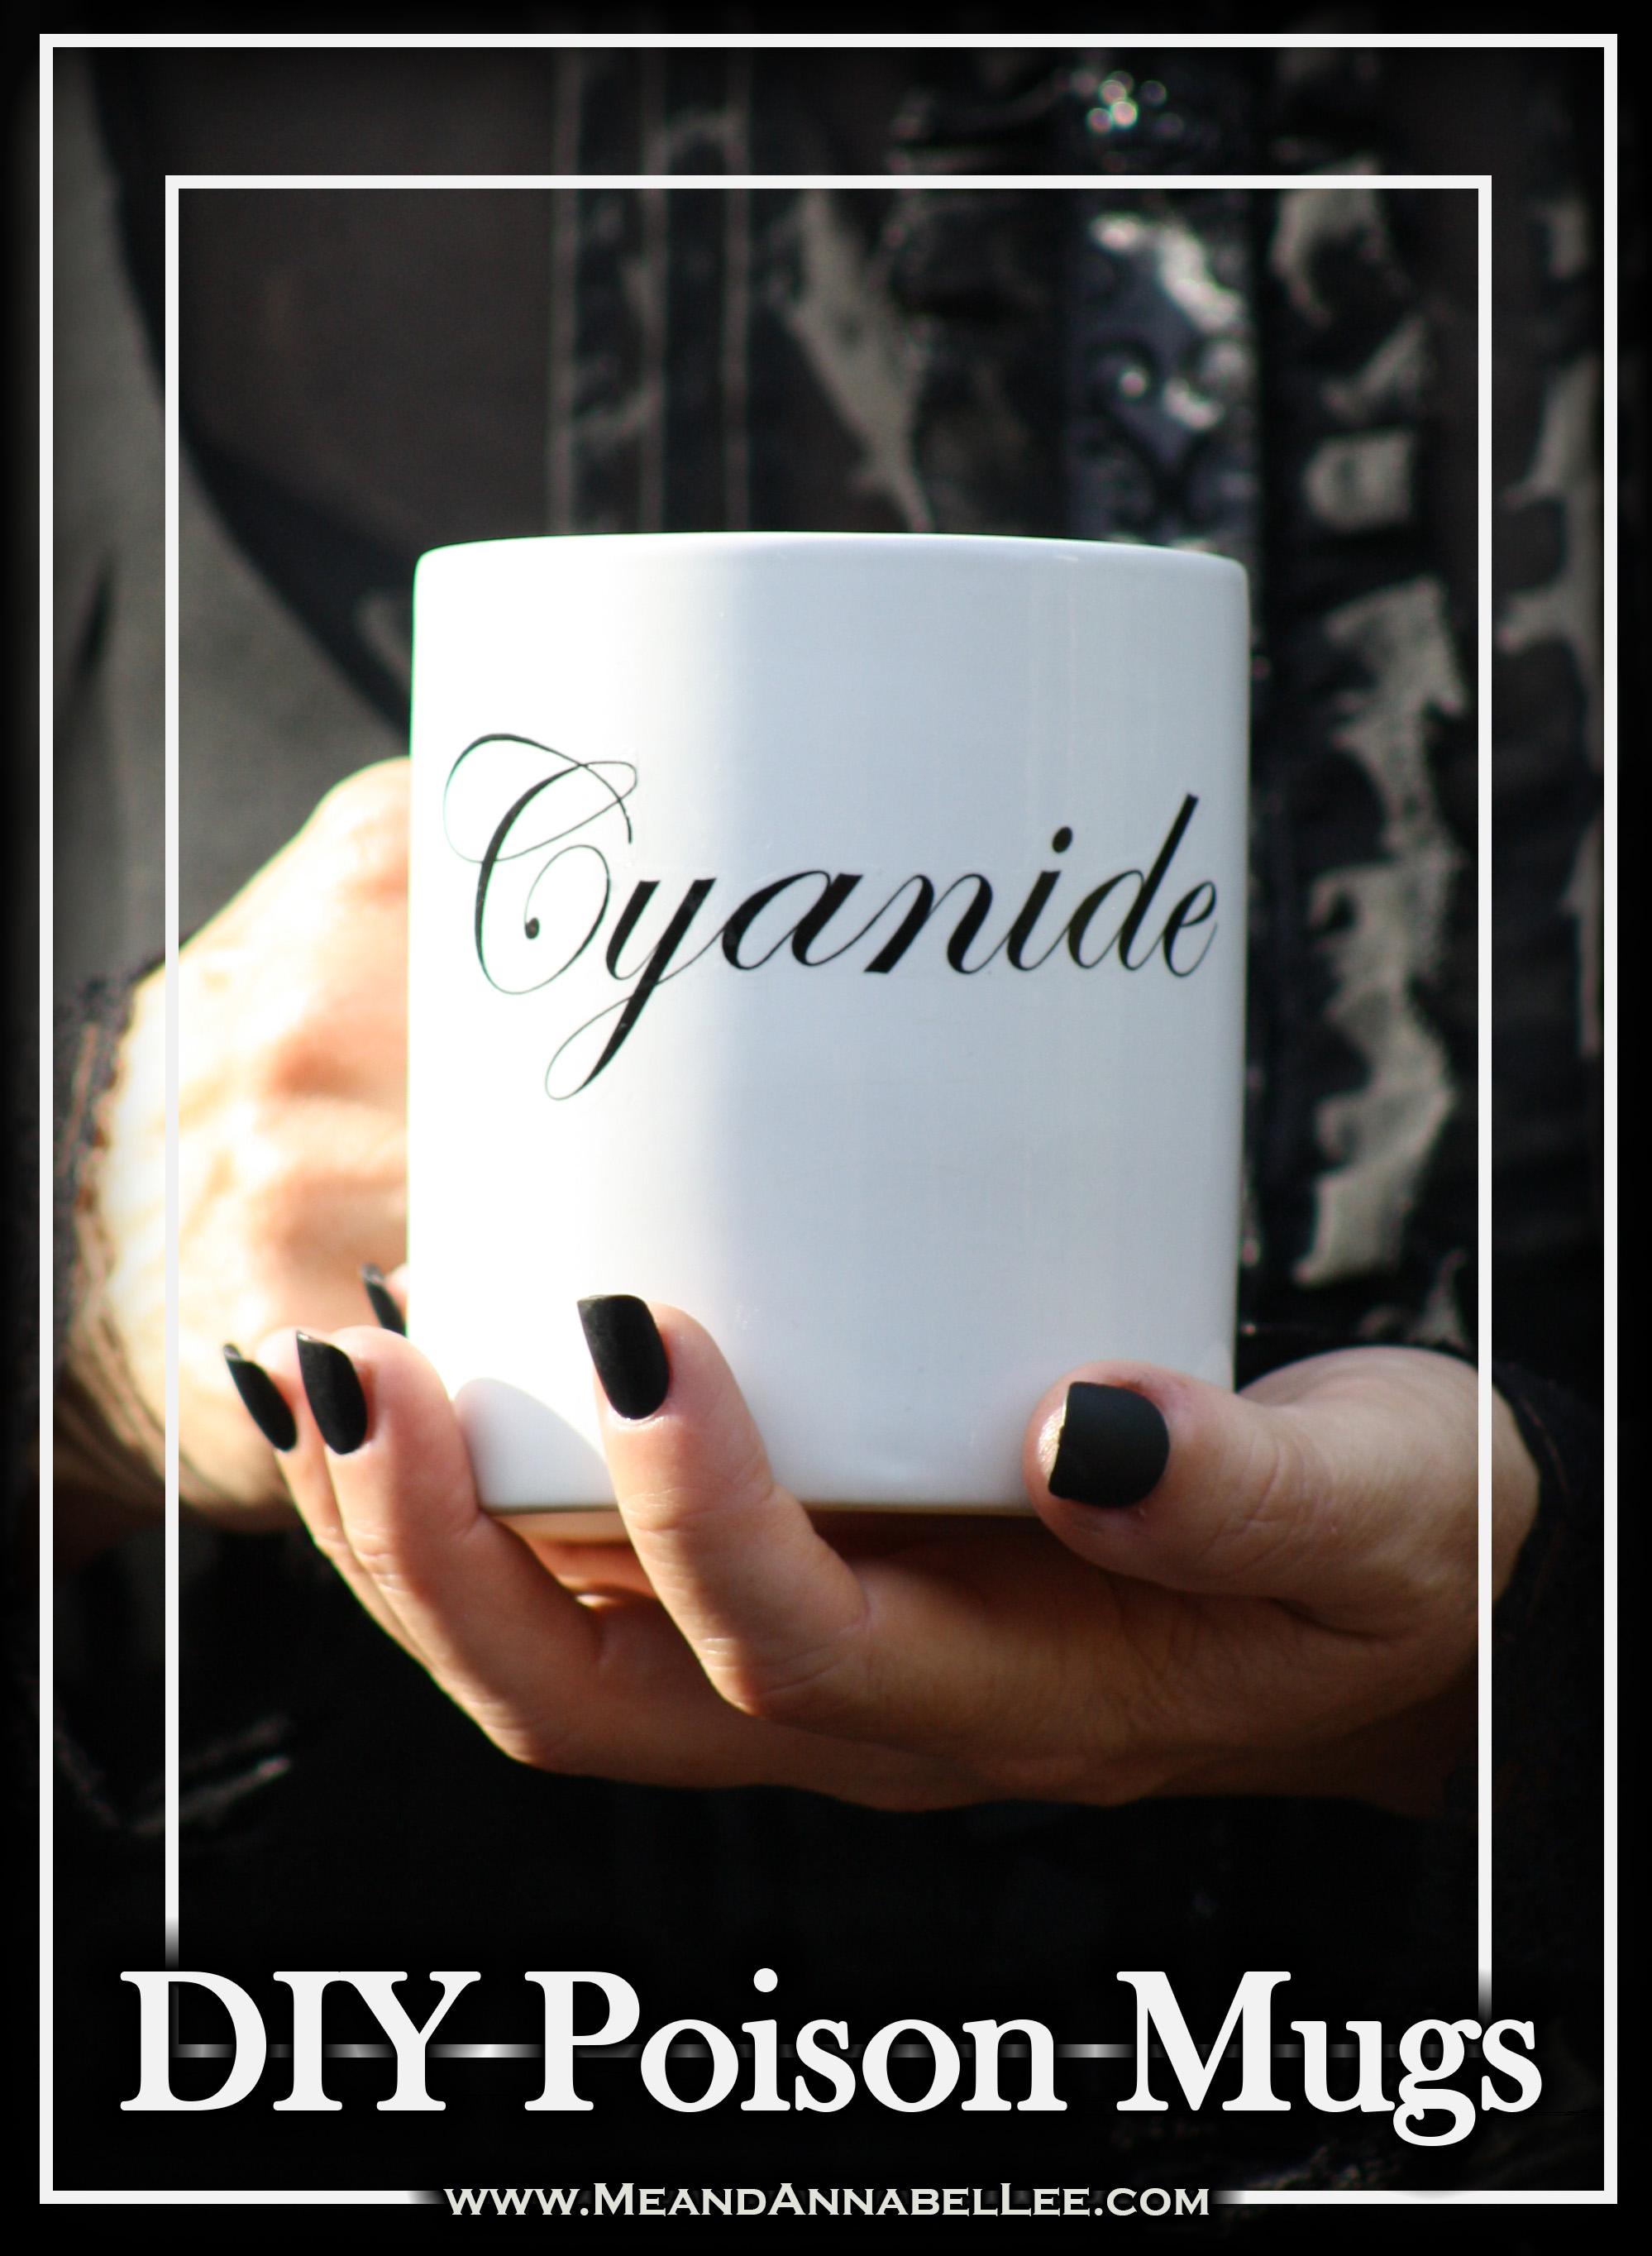 DIY Poisonous Coffee Mugs | Cyanide | Goth It Yourself | WaterSlide Decal Image Transfer Method | www.MeandAnnabelLee.com - Blog for all things Dark, Gothic, Victorian, & Unusual